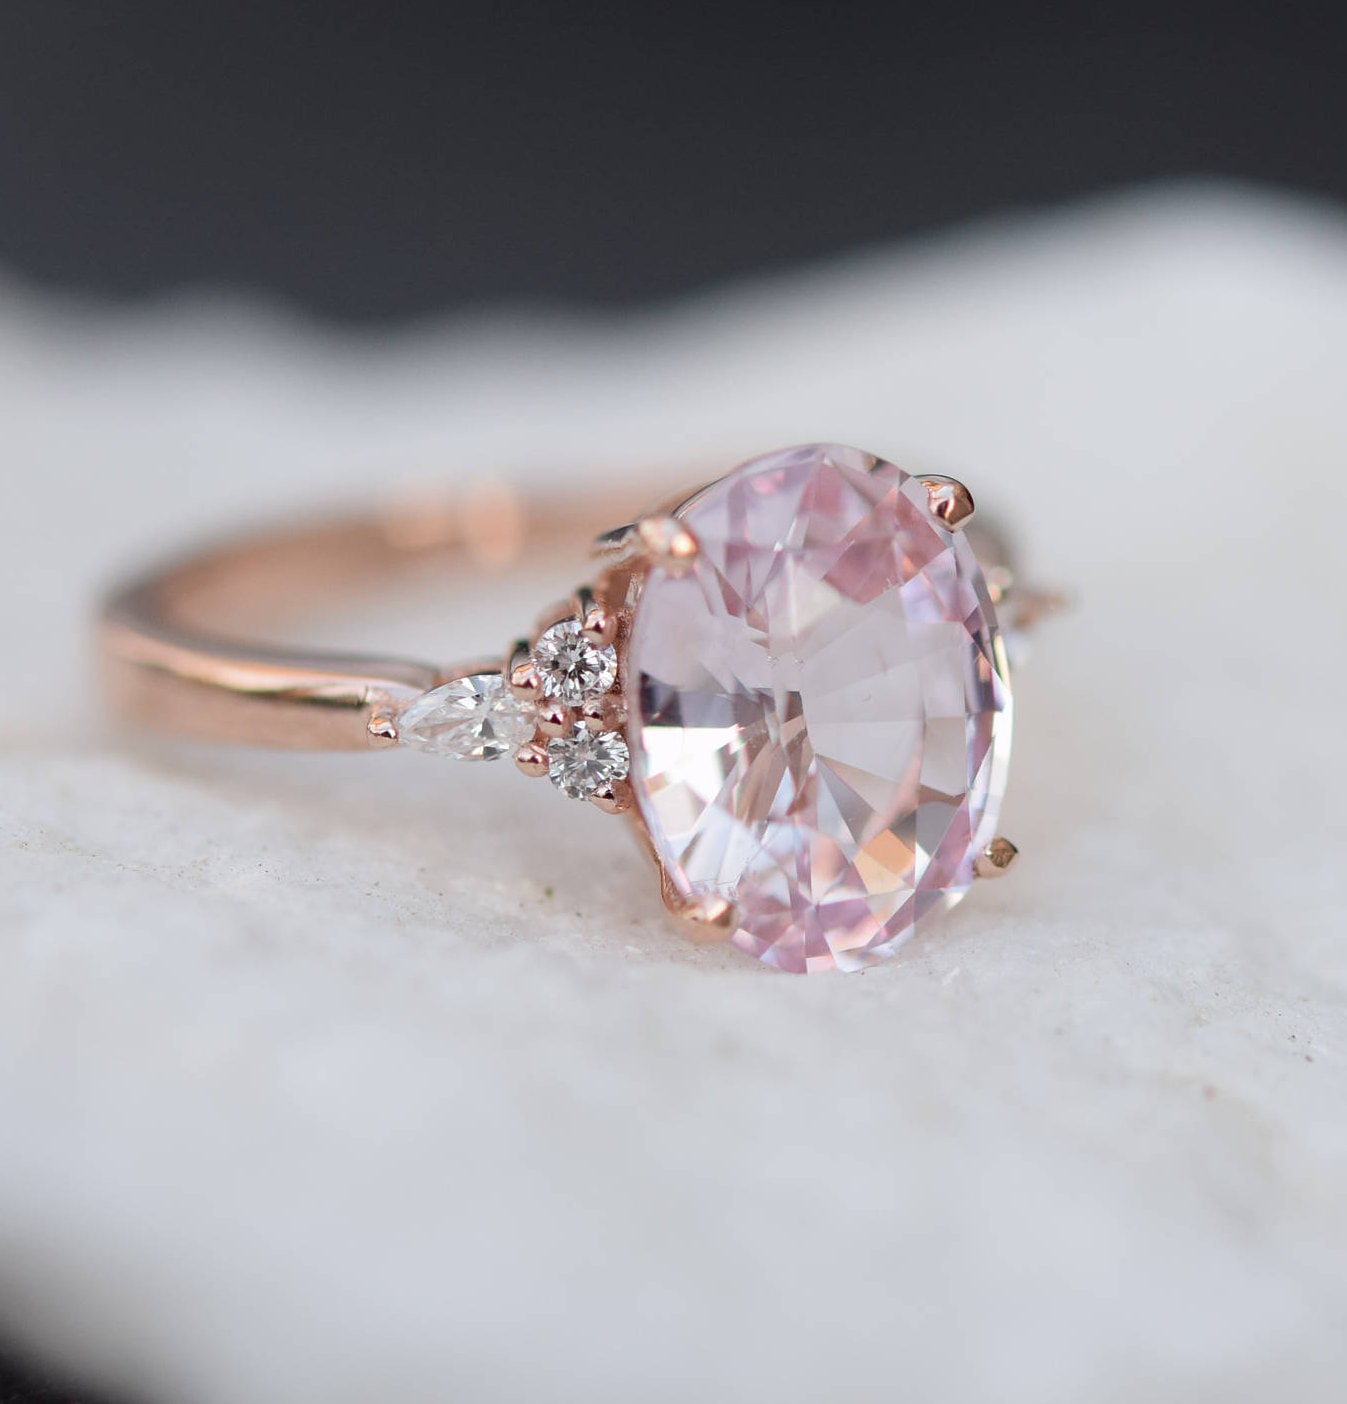 Imperial Bad beven Blush Pink Sapphire Engagement Ring. Light Peach Pink Sapphire - Etsy